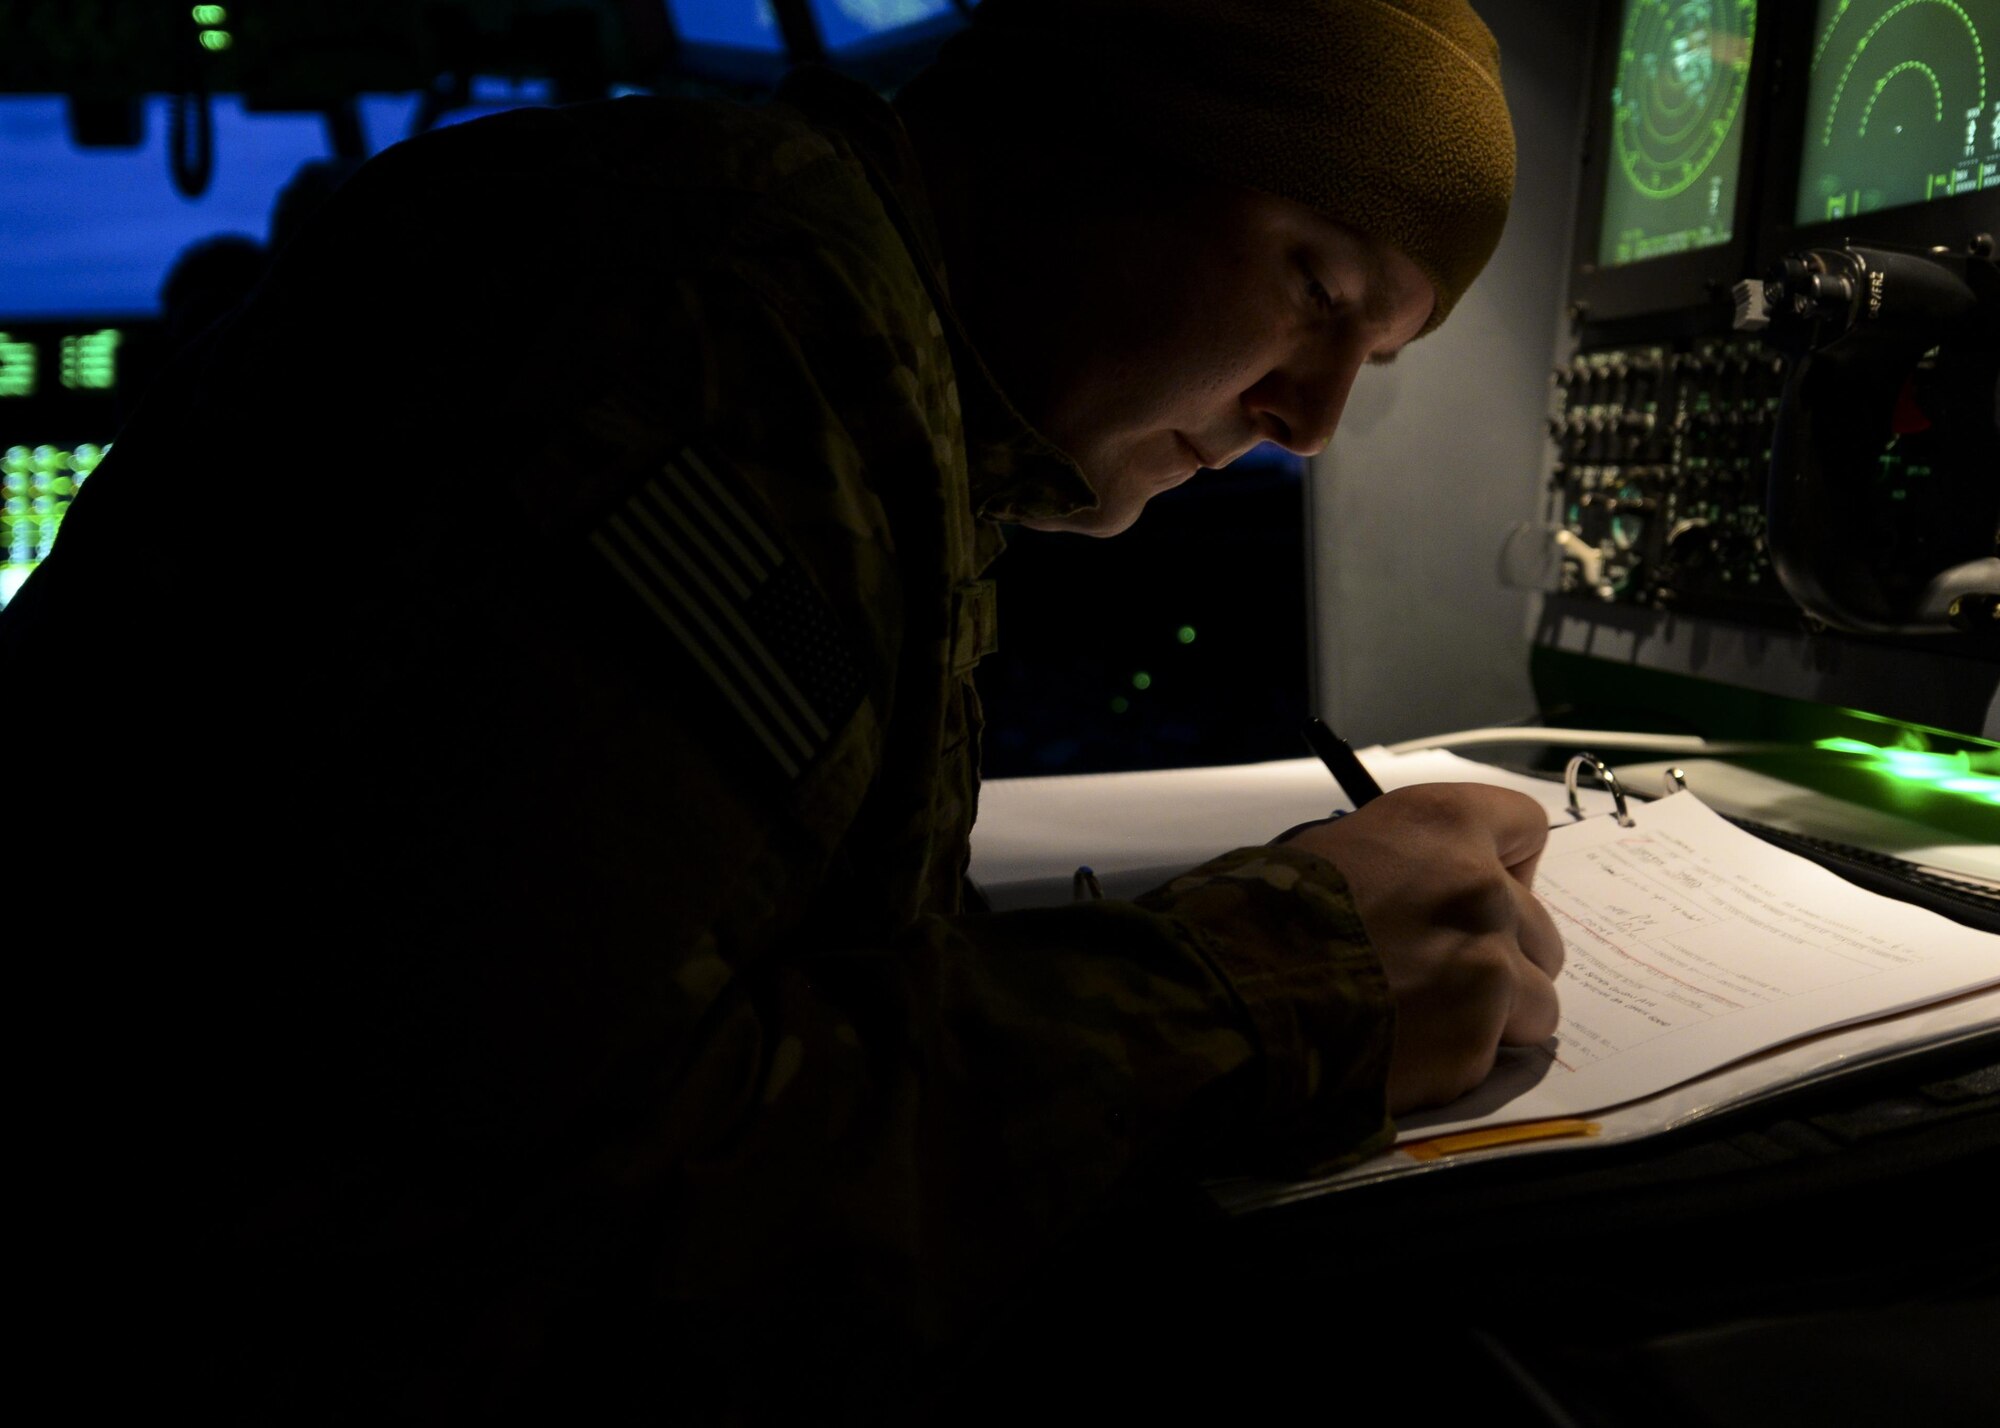 U.S. Air Force Senior Airman David Busch, 352nd Special Operations Air Maintenance Squadron MC-130J Commando II crew chief, performs maintenance checks during a pre-flight April 16, 2016, at Stuttgart Air Base, Germany. The preparations were made in order to conduct an airdrop mission with a U.S. Navy Maritime Craft Aerial Delivery System. (U.S. Air Force photo by Senior Airman Victoria H. Taylor/Released)